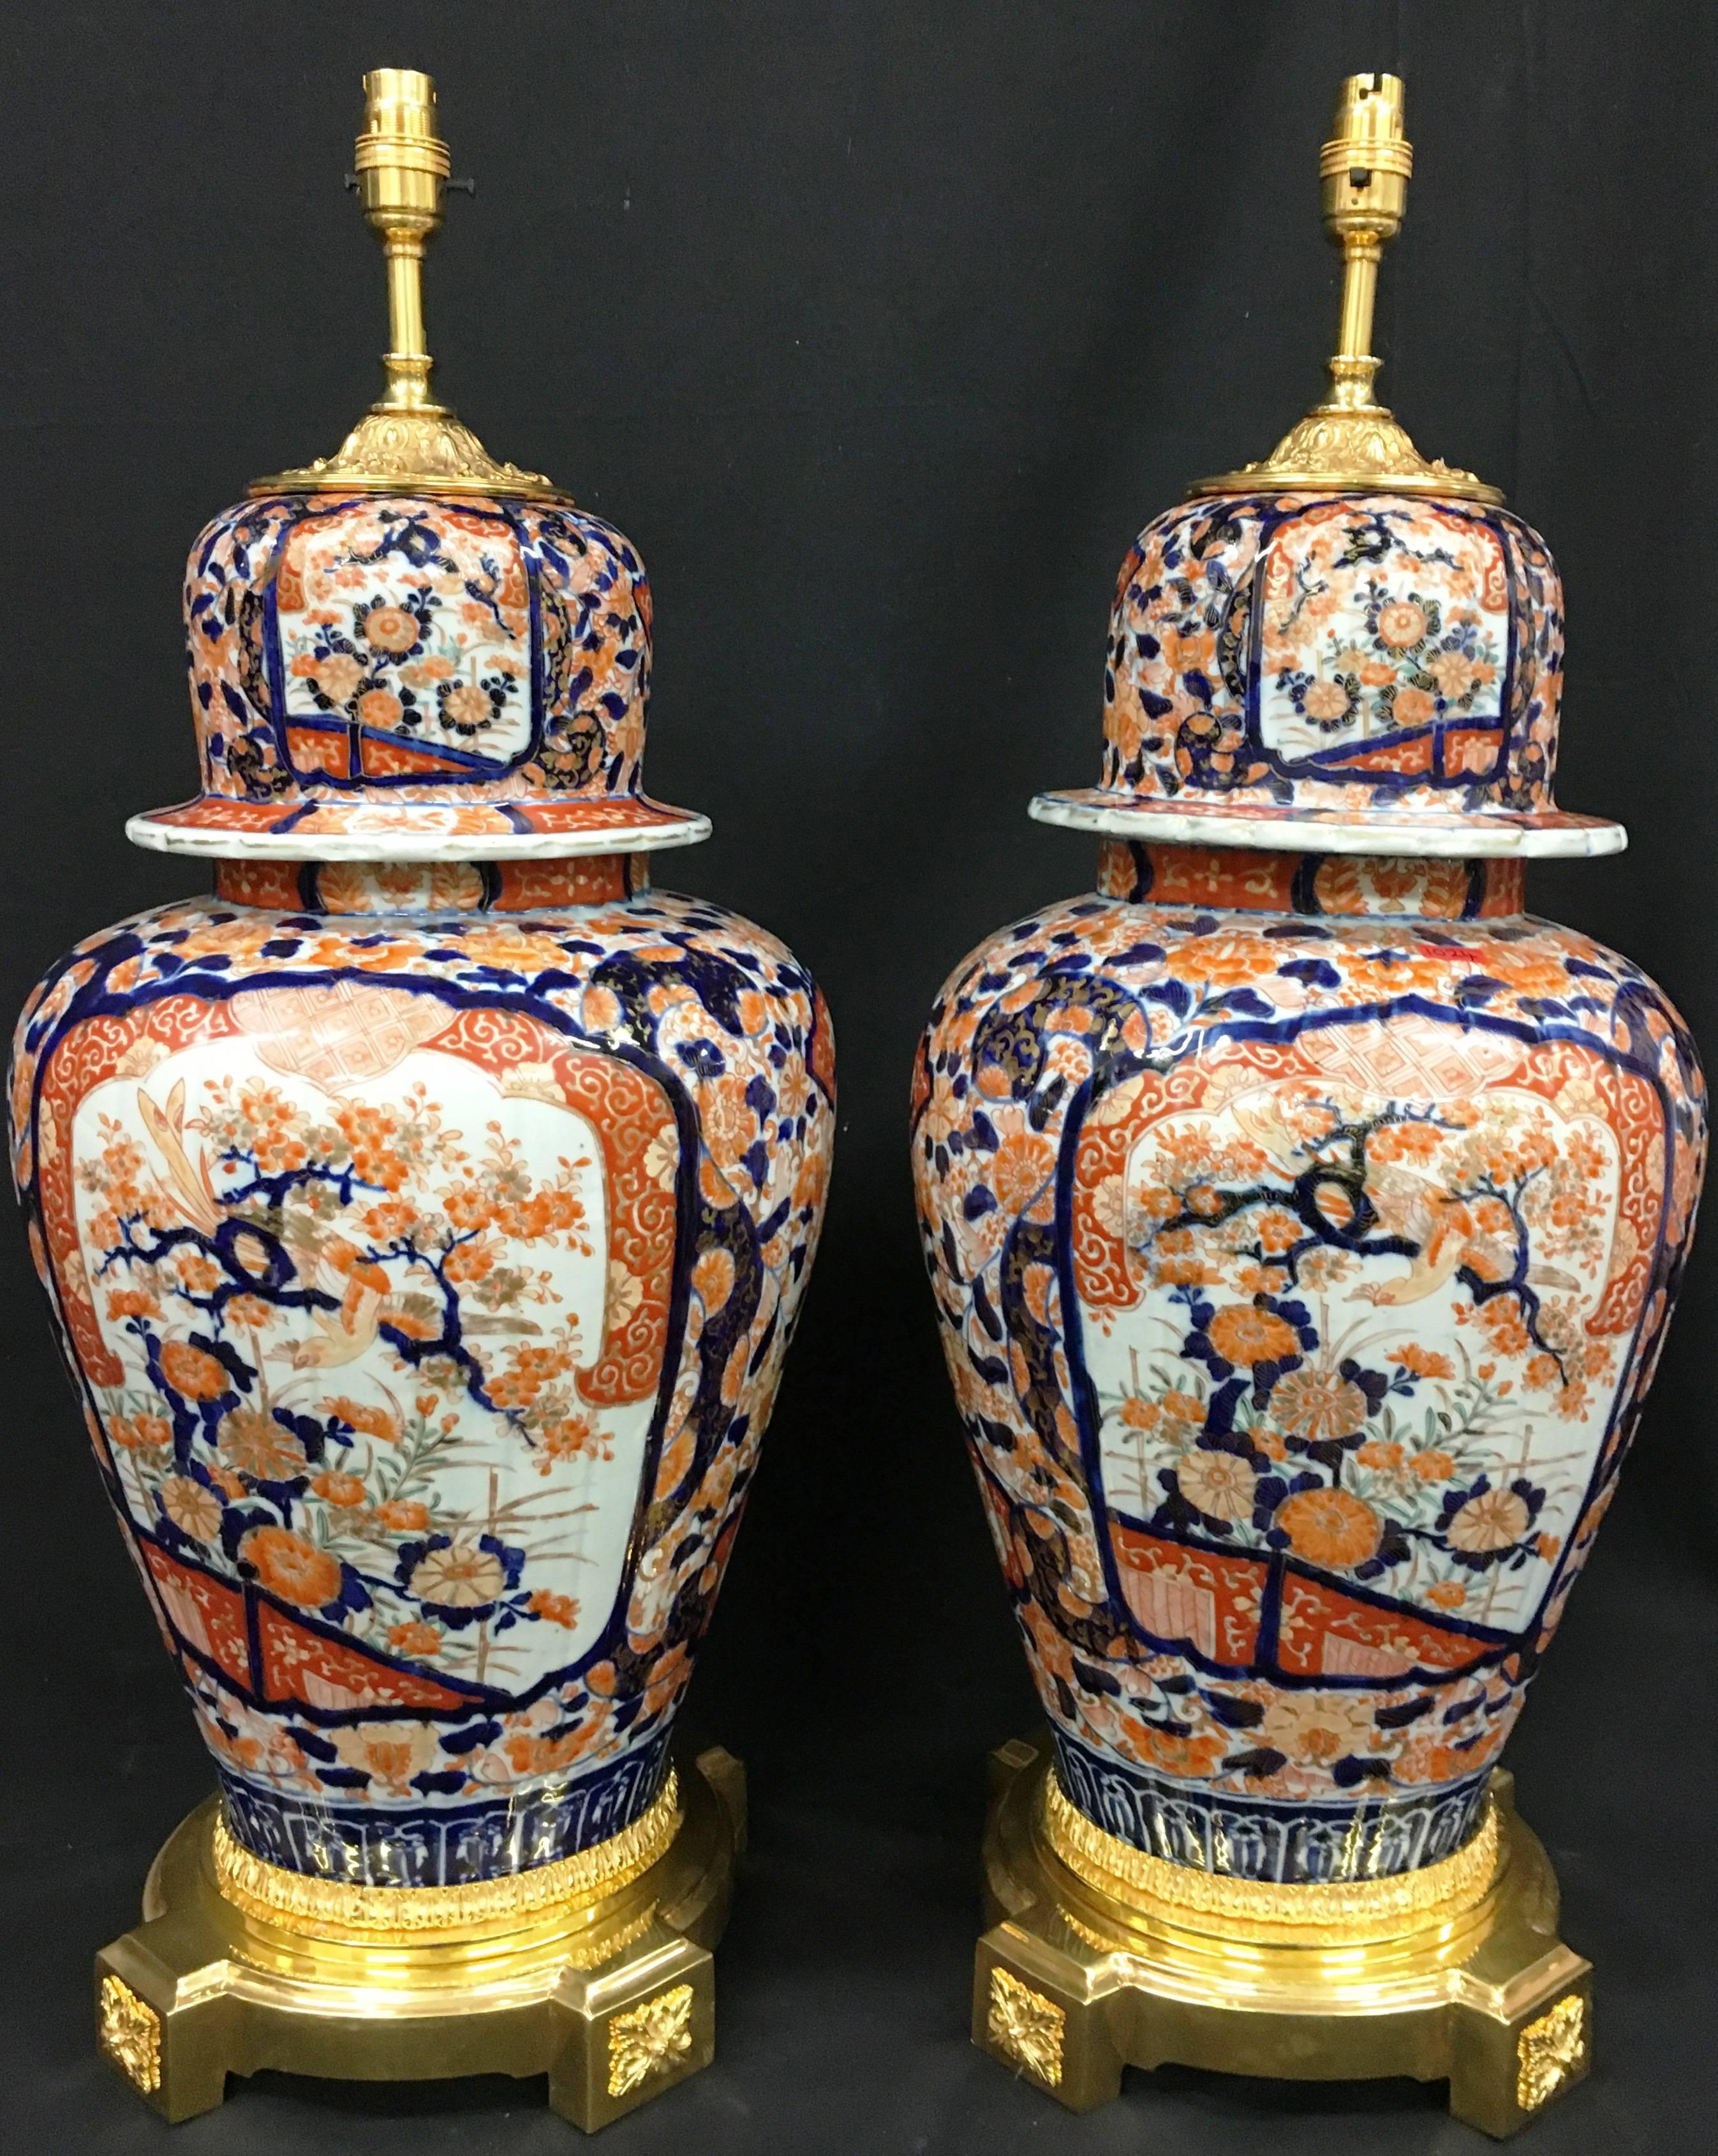 A very impressive pair of Japanese lidded Imari vases/lamps. Each with painted inset panels depicting flowers, trees and exotic birds. Mounted with gilded ormolu tops and bases.